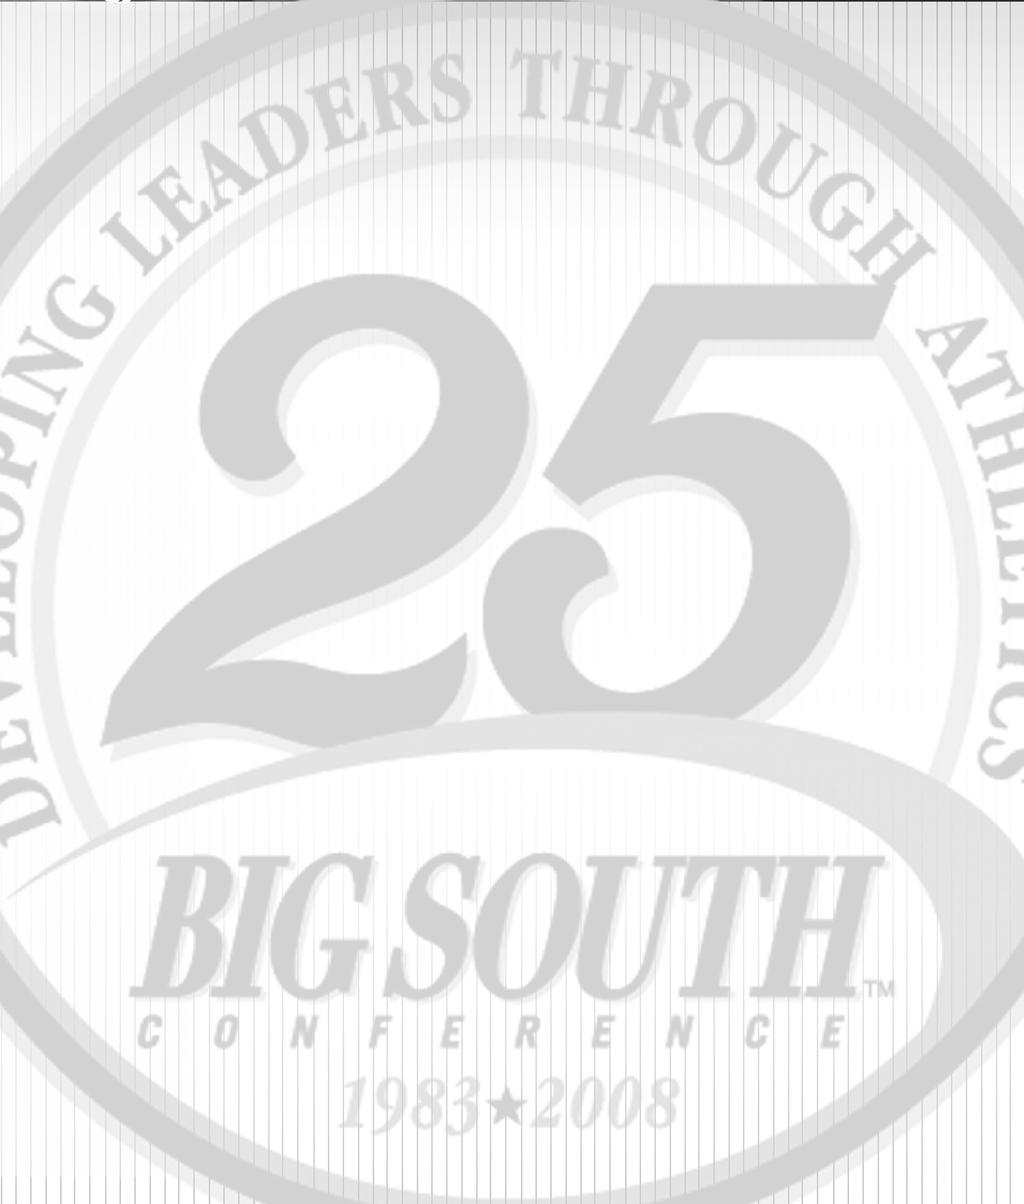 BIG SOUTH CONFERENCE The Big South Conference is celebrating its 25th Anniversary in 2008-09, a milestone coming on the heels of unprecedented achievements and unparalleled success in League history